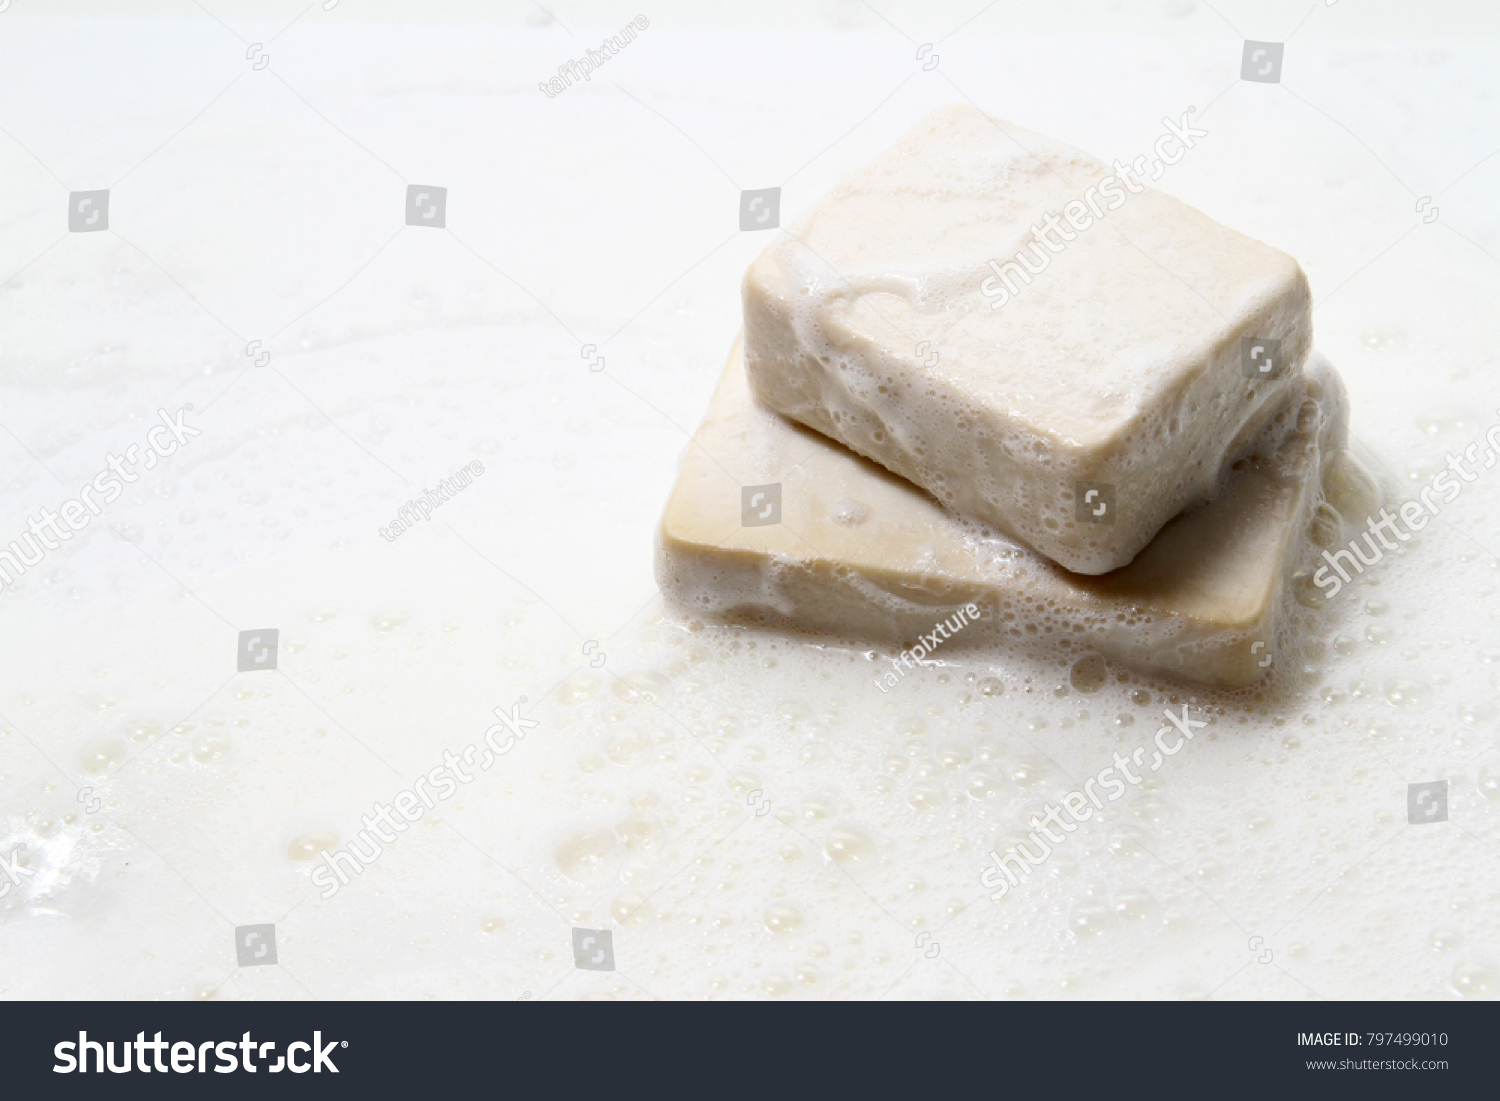 Soap bar / a soap is a salt of a fatty acid. Household uses for soaps include washing, bathing, and other types of housekeeping #797499010